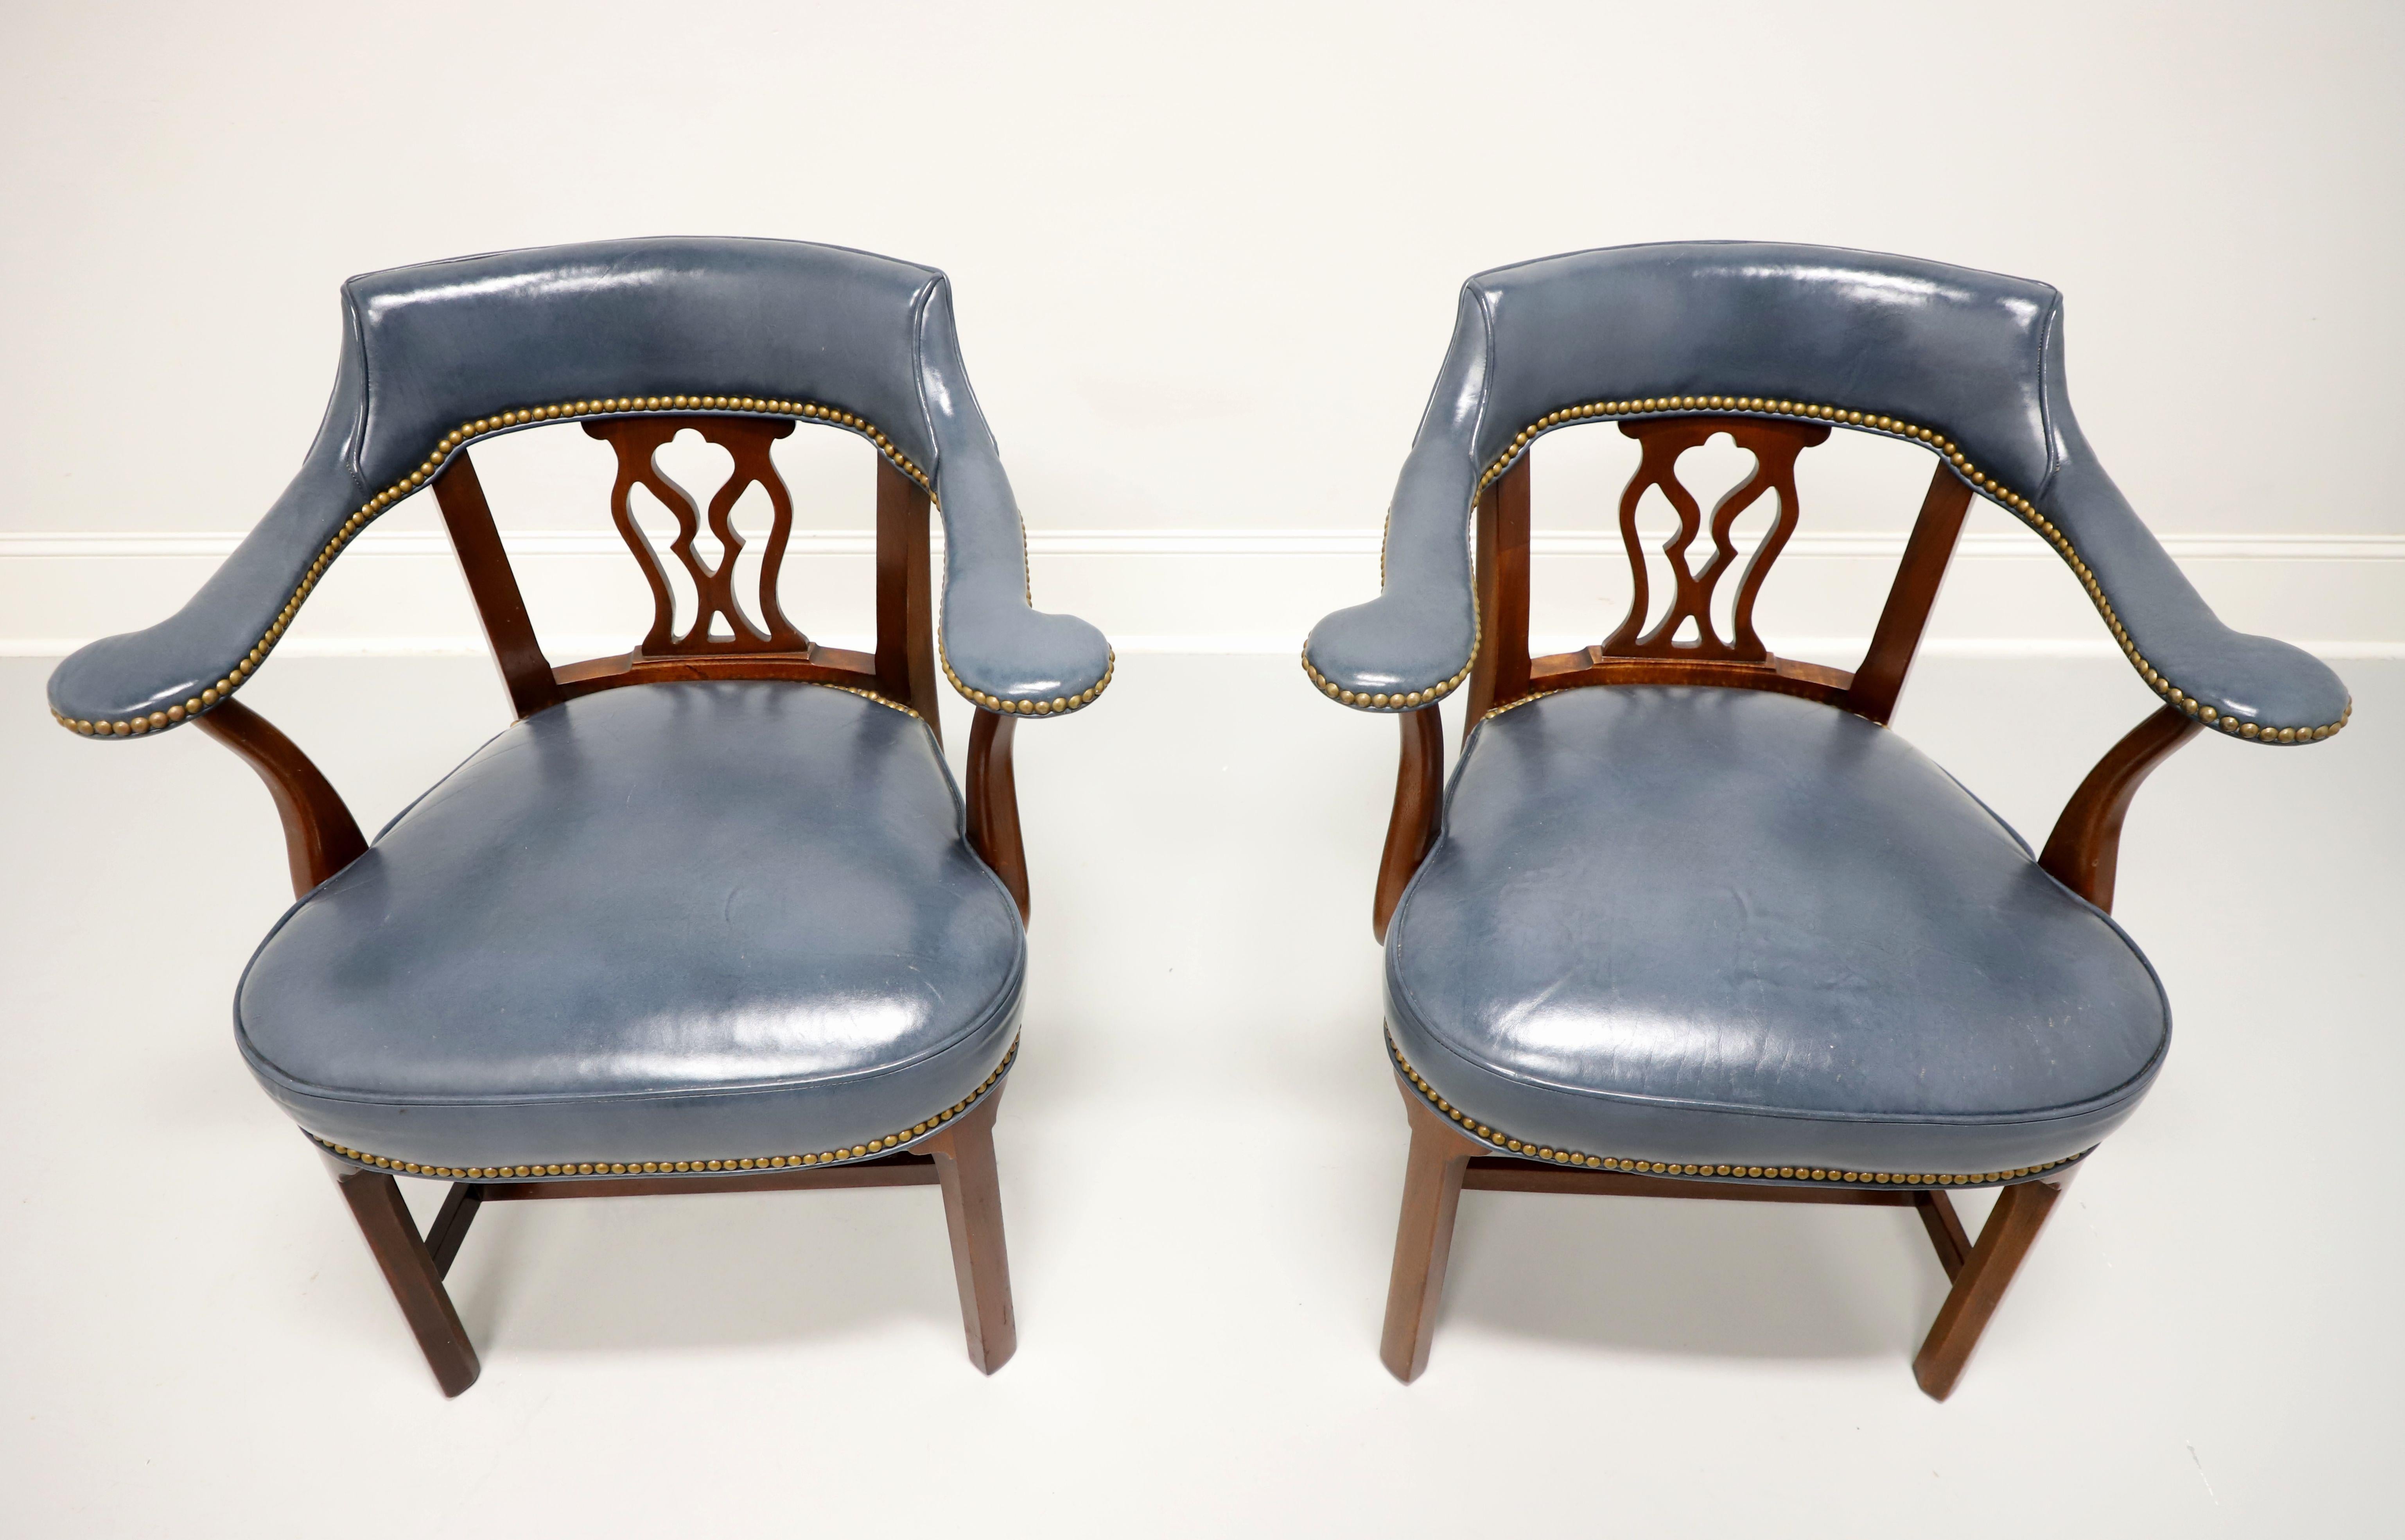 A pair of Traditional style armchairs by Hickory Chair. Mahogany frame with a decoratively carved backrest, blue color leather upholstered, barrel back, leather arms, brass nailhead trim, flared rear legs, carved straight front legs, and stretchers.